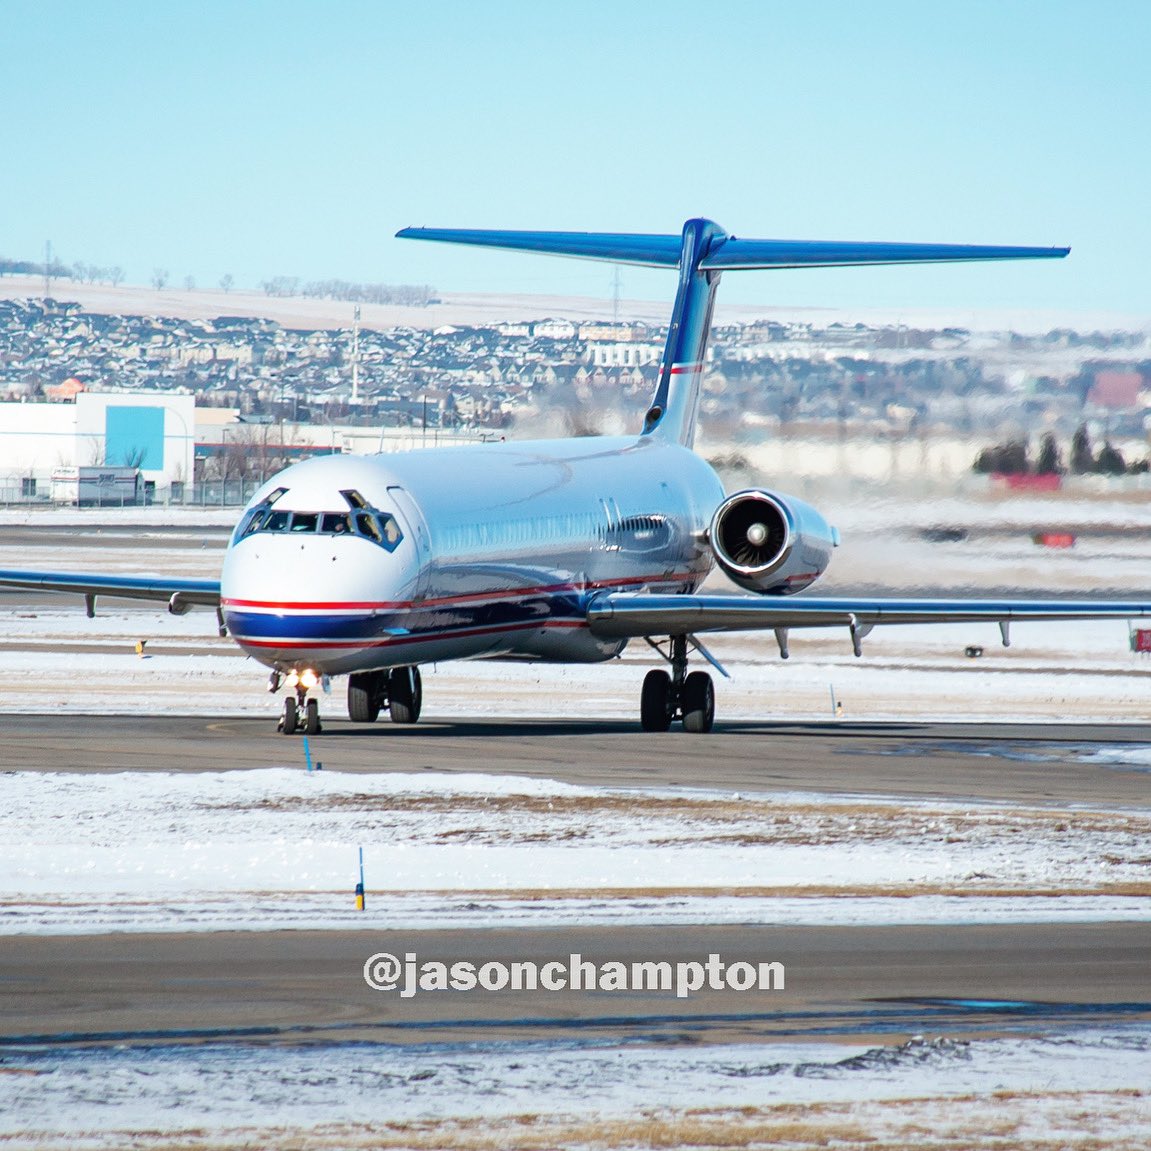 The Olympia Aviation McDonnell Douglas MD-81 registered N682RW which the Detroit Red Wings & Tigers used for years #yyc #avgeek #aviation #aviationlovers #aviationphotography #aviationdaily #planespotting #planespotter #photography